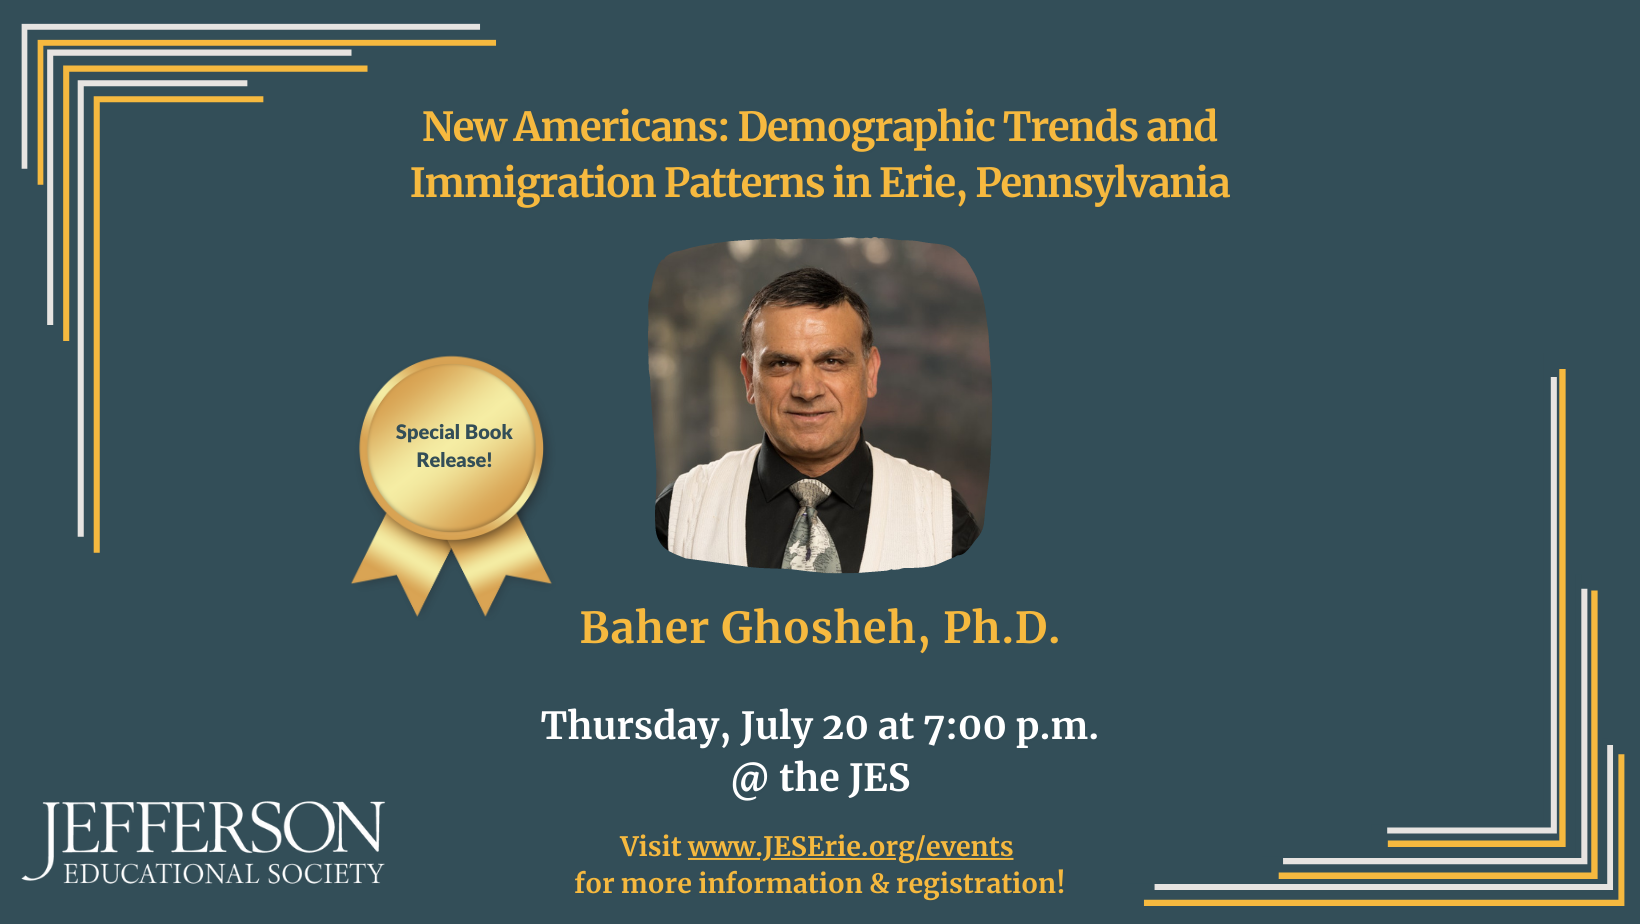 Ghosheh's Long-Awaited Book on Immigration Featured in Program, Reception on Thursday